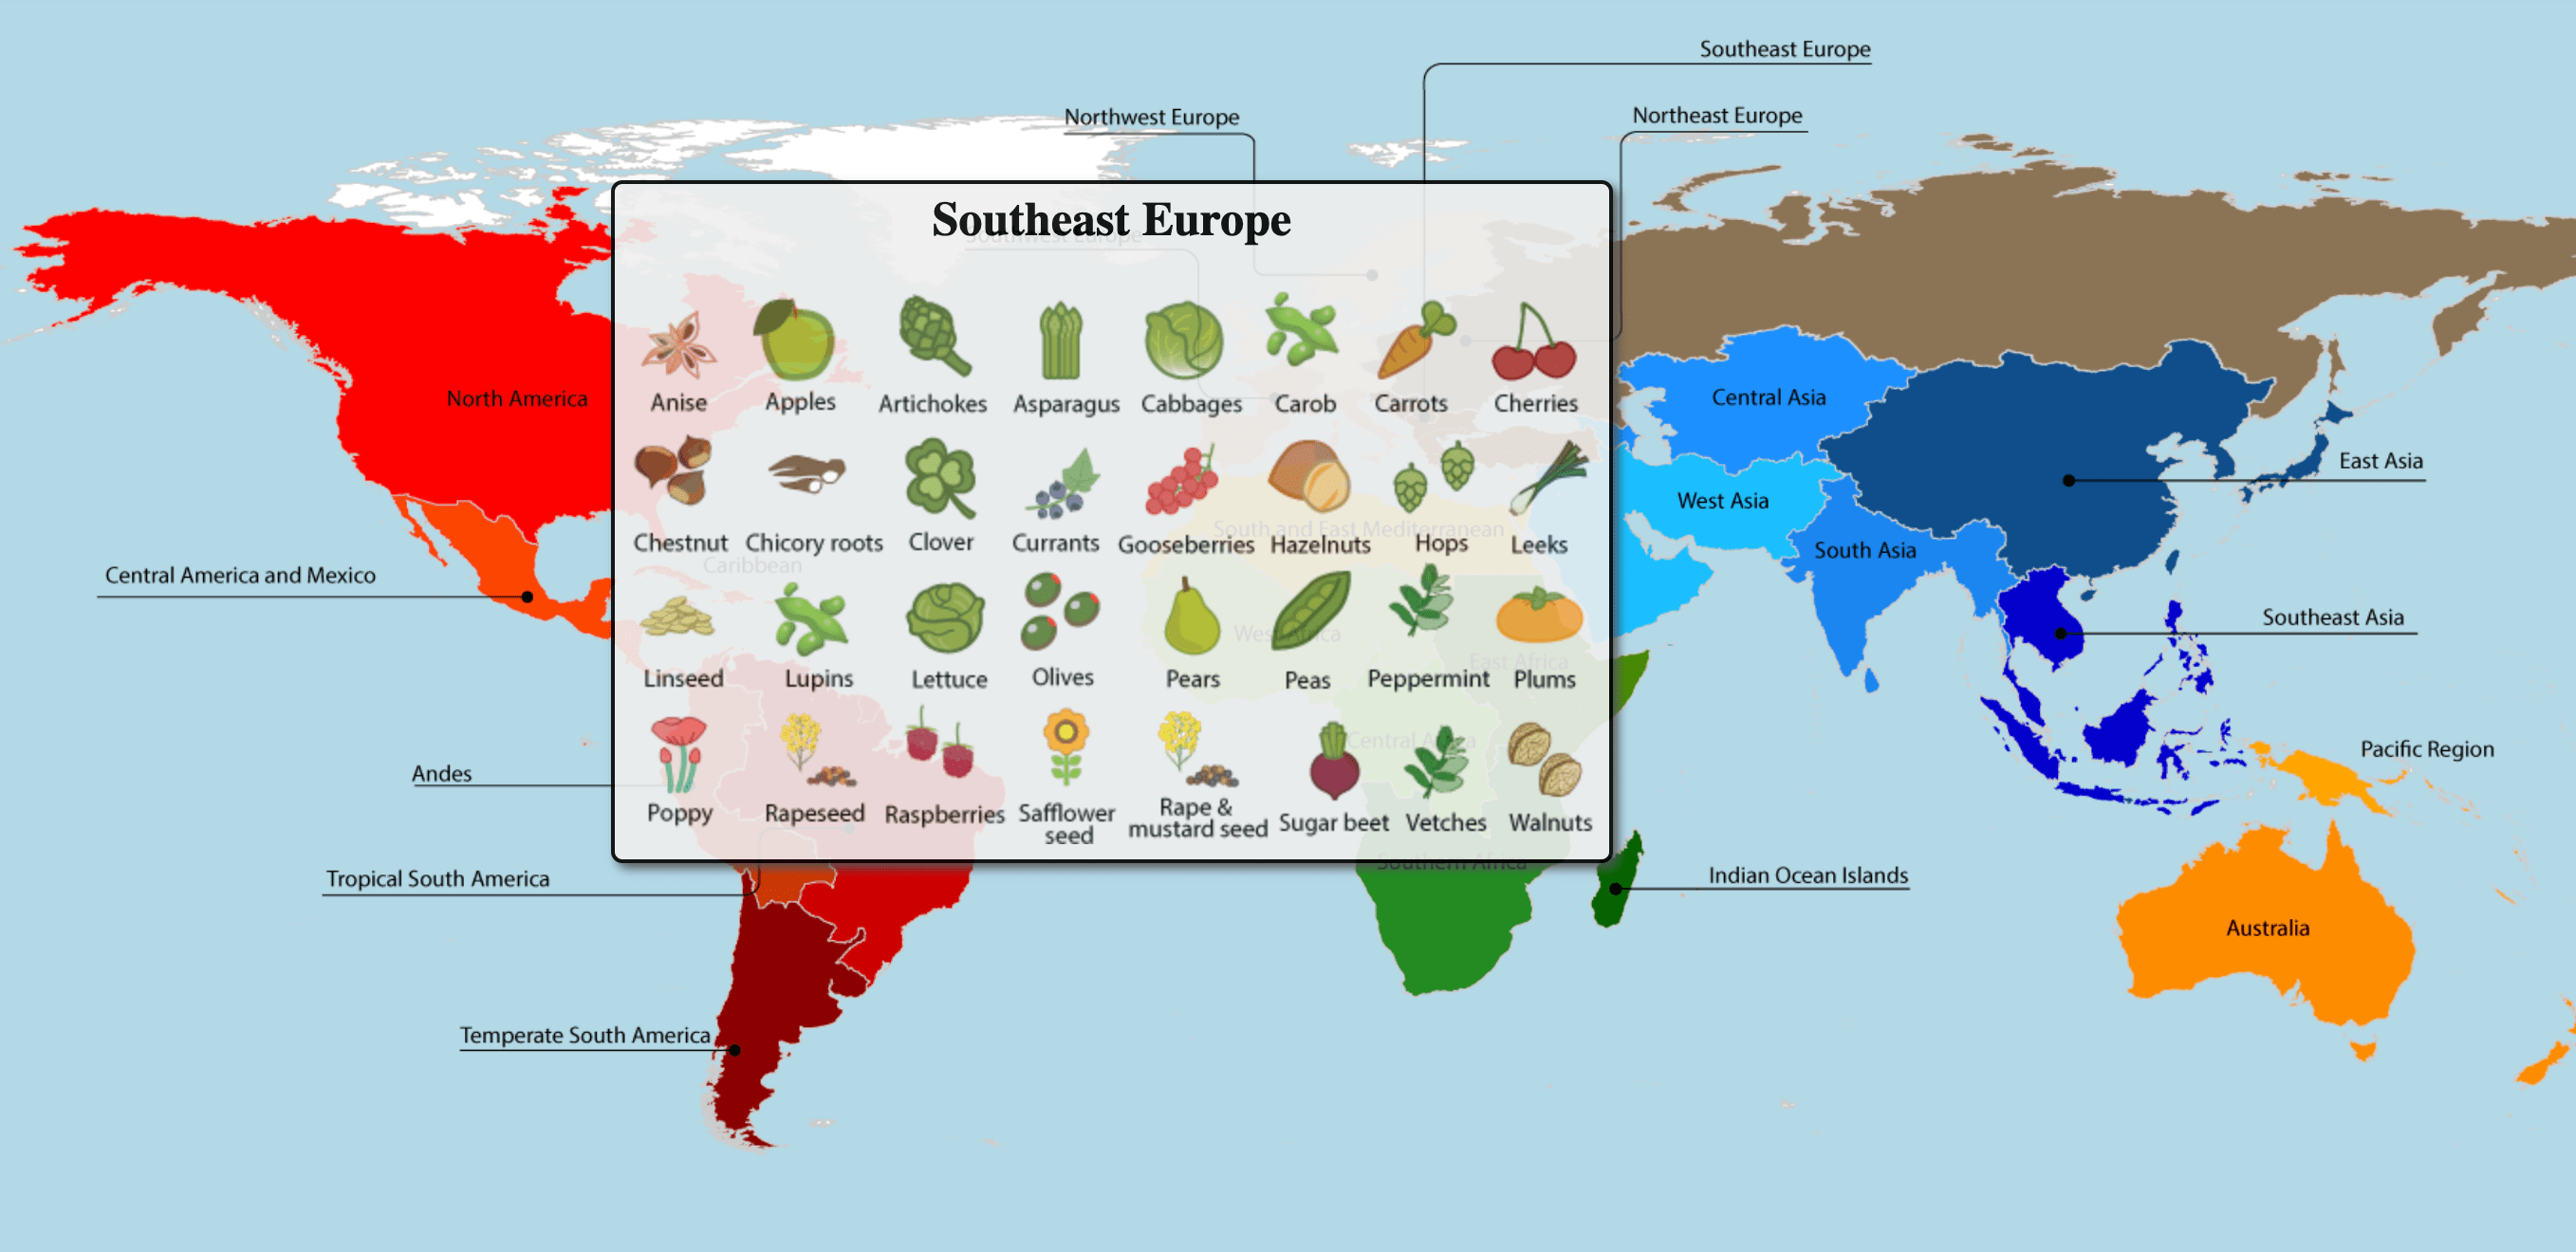 World food Map. South East Europe какие страны. Northeast Asia. Map of Countries of North and South America. A growing country